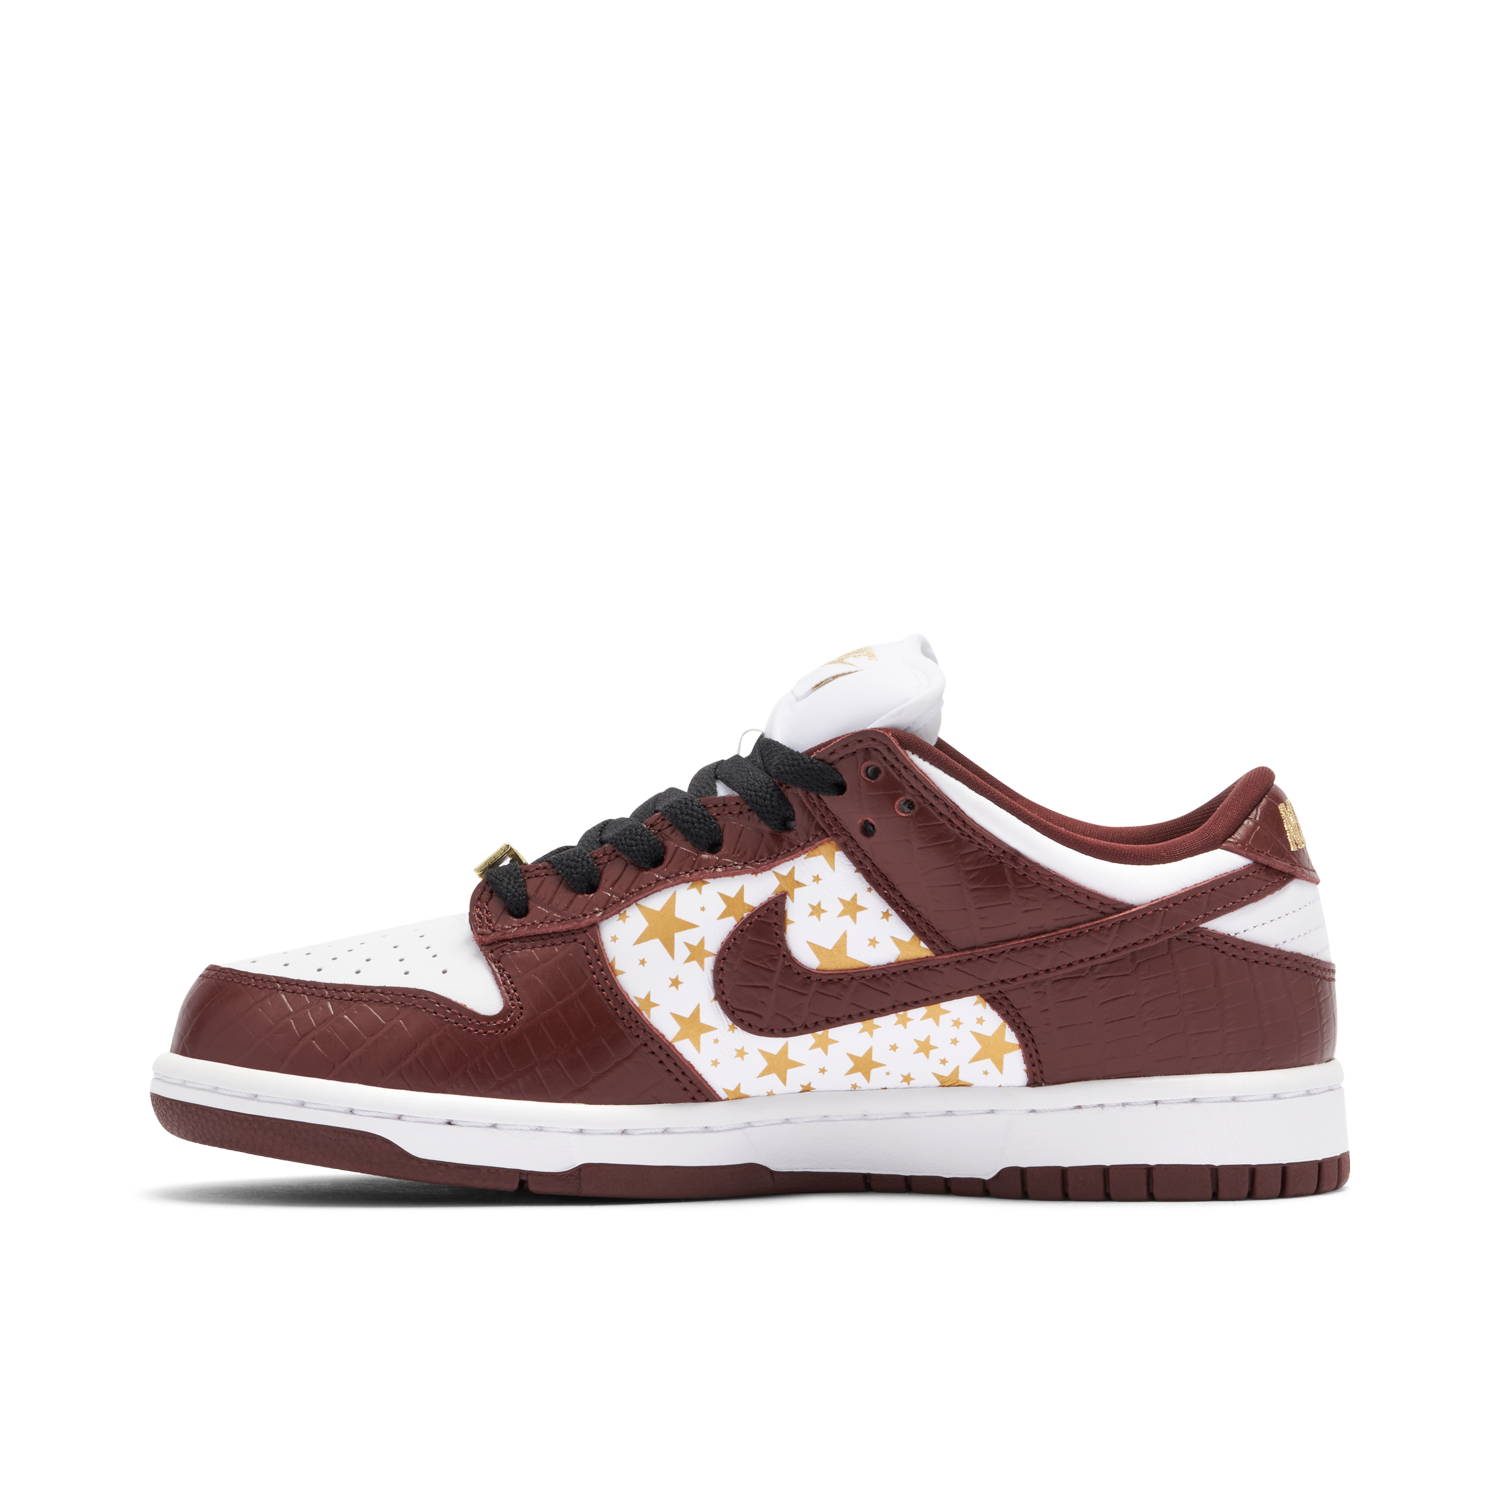 Supreme x Nike SB Dunk Low Stars Barkroot Brown | DH3228-103 | Laced